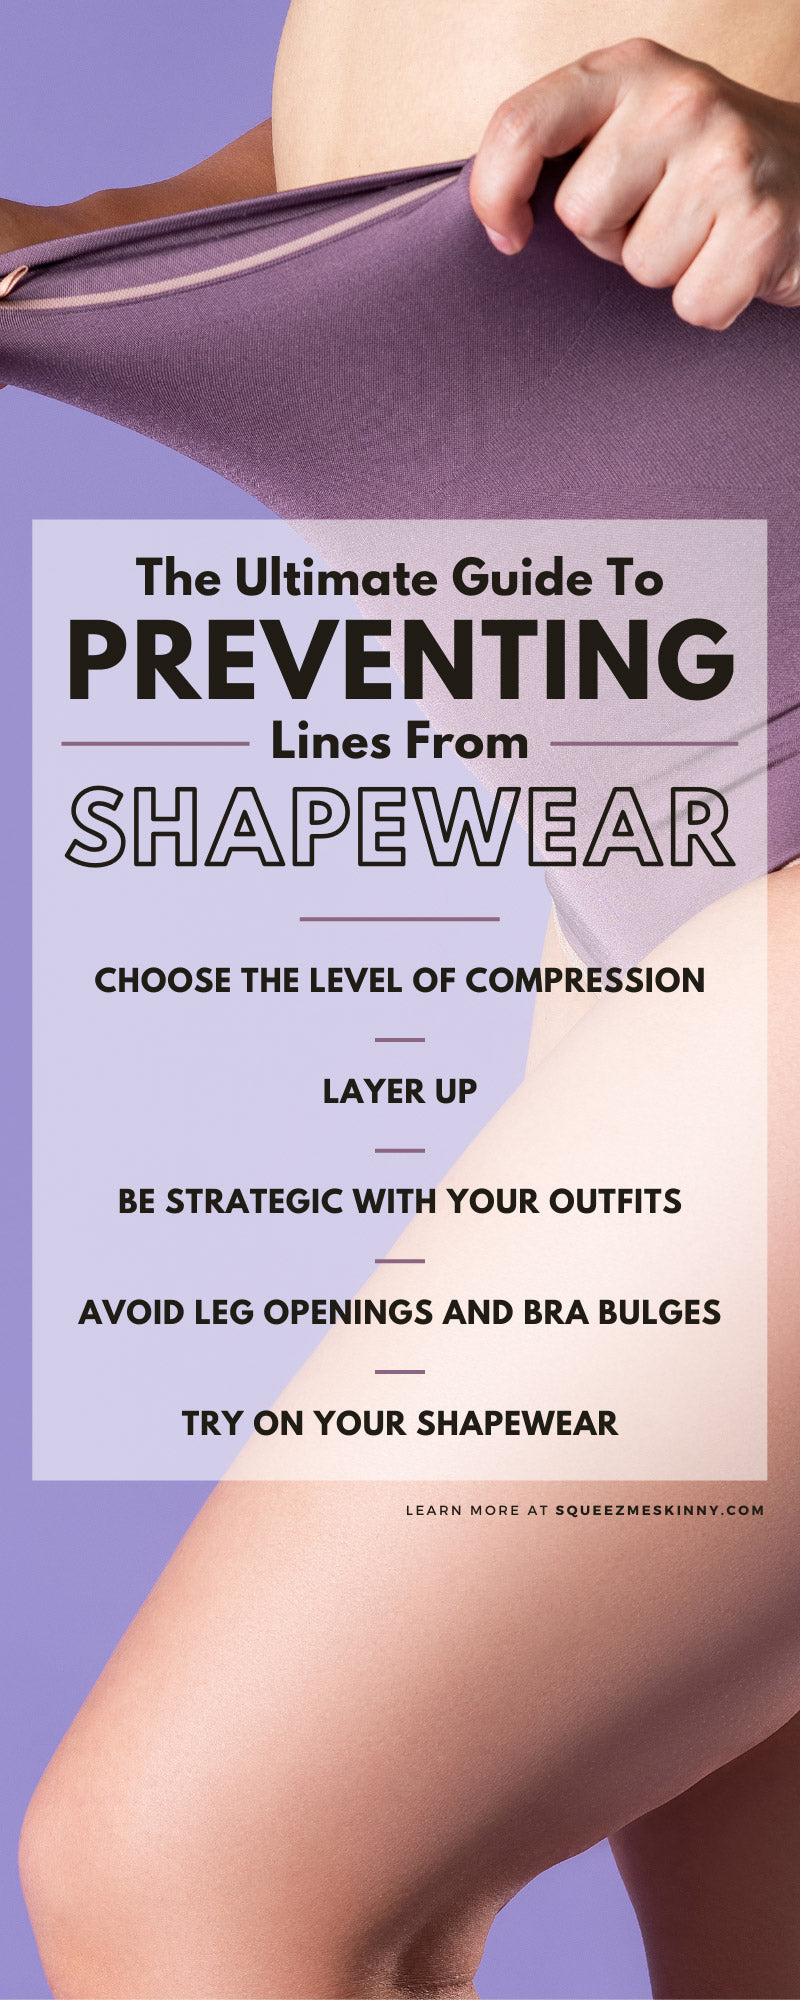 How to Choose The Right Compression Level Of Shapewear